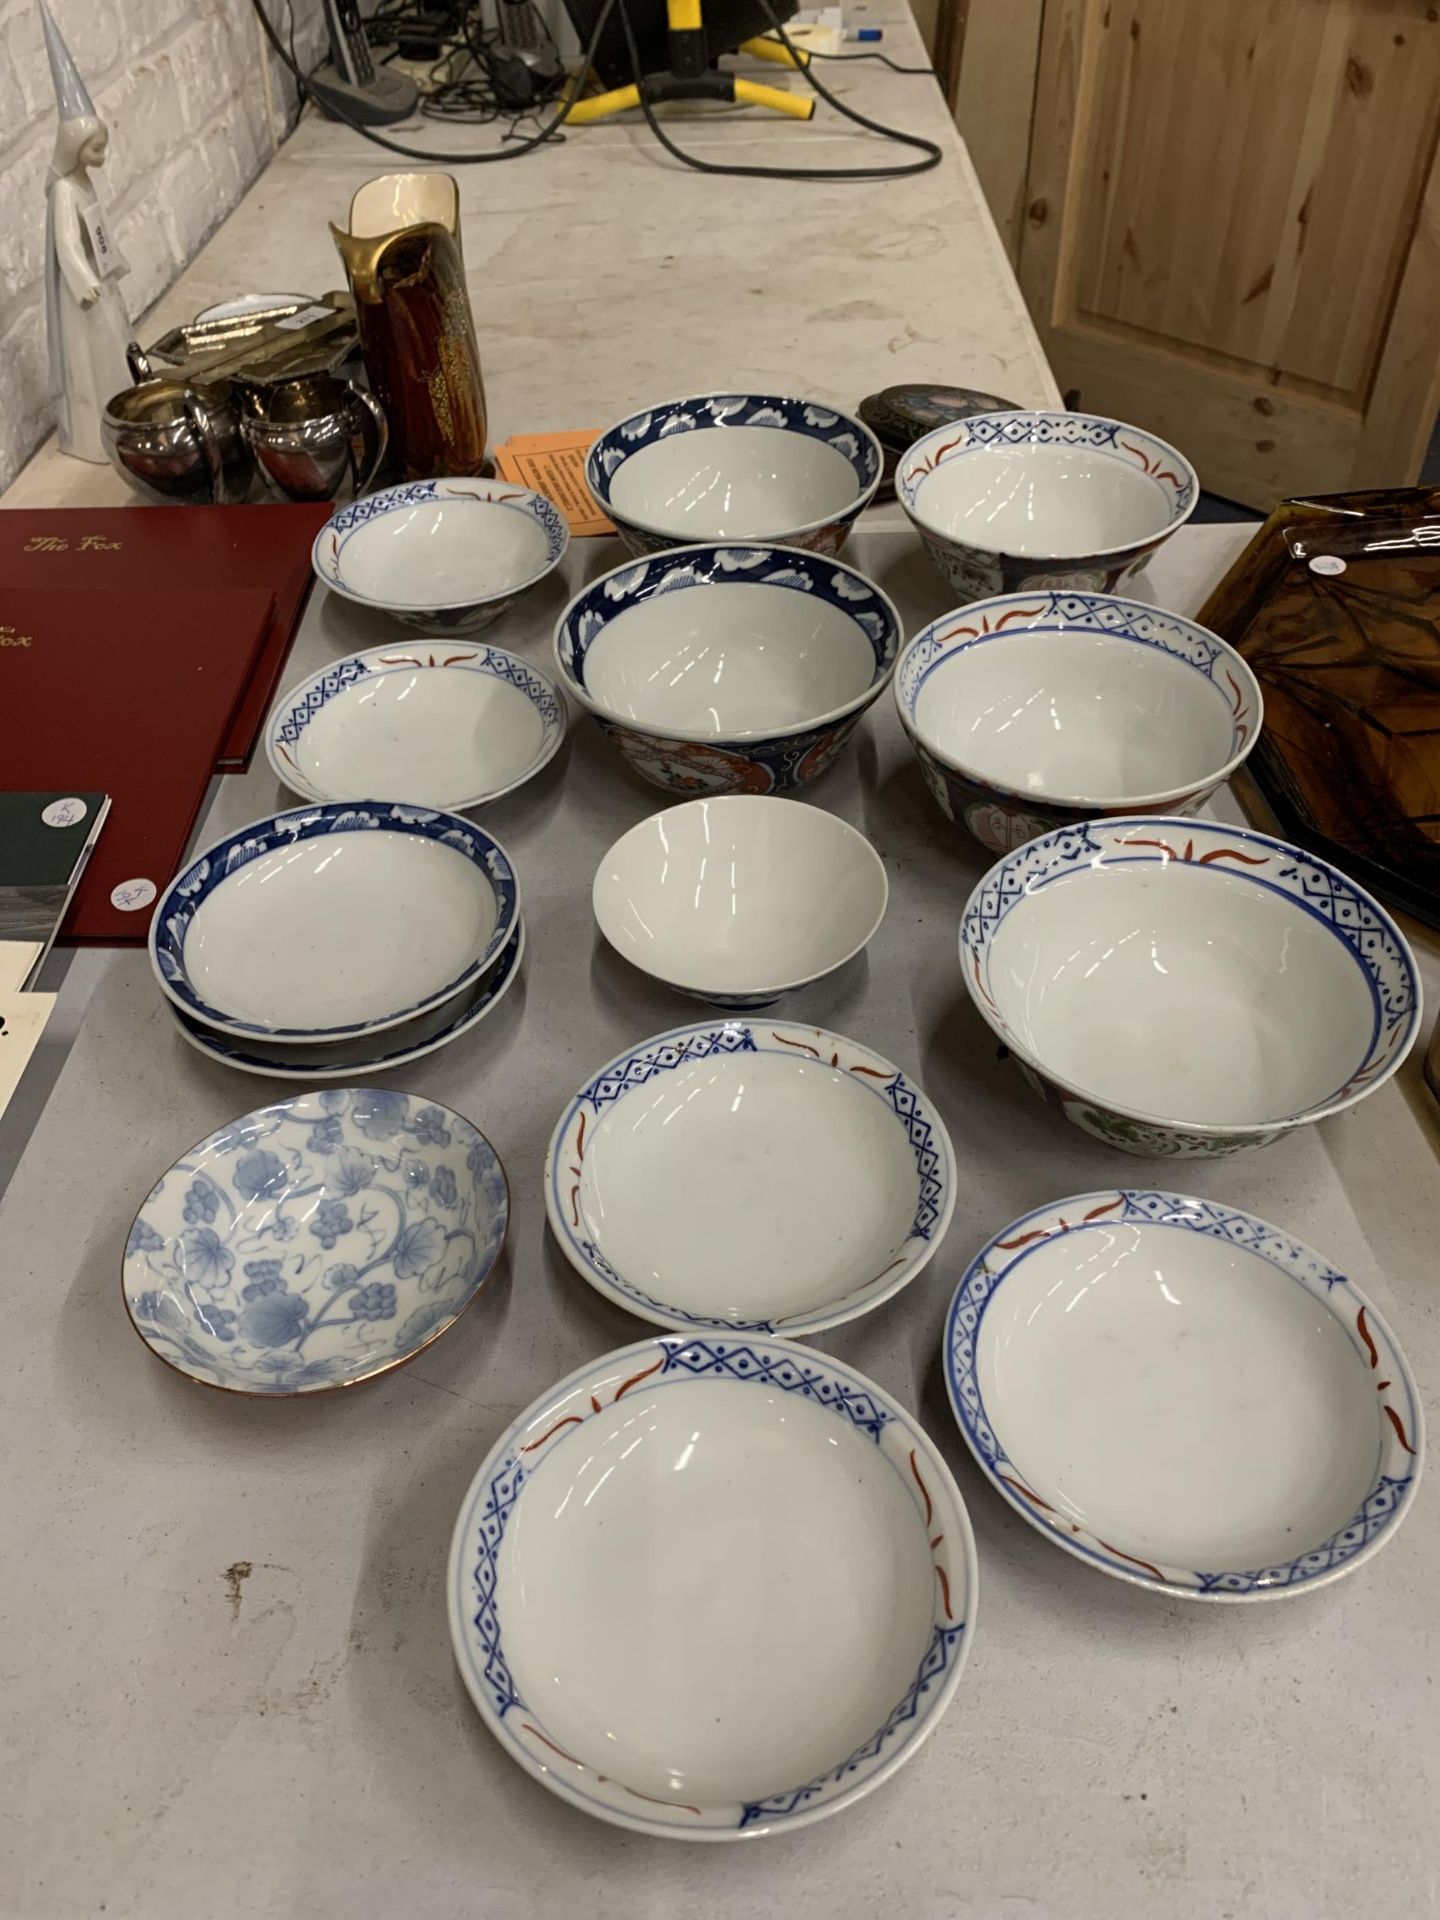 LARGE AMOUNT OF ORIENTAL STYLE BOWLS